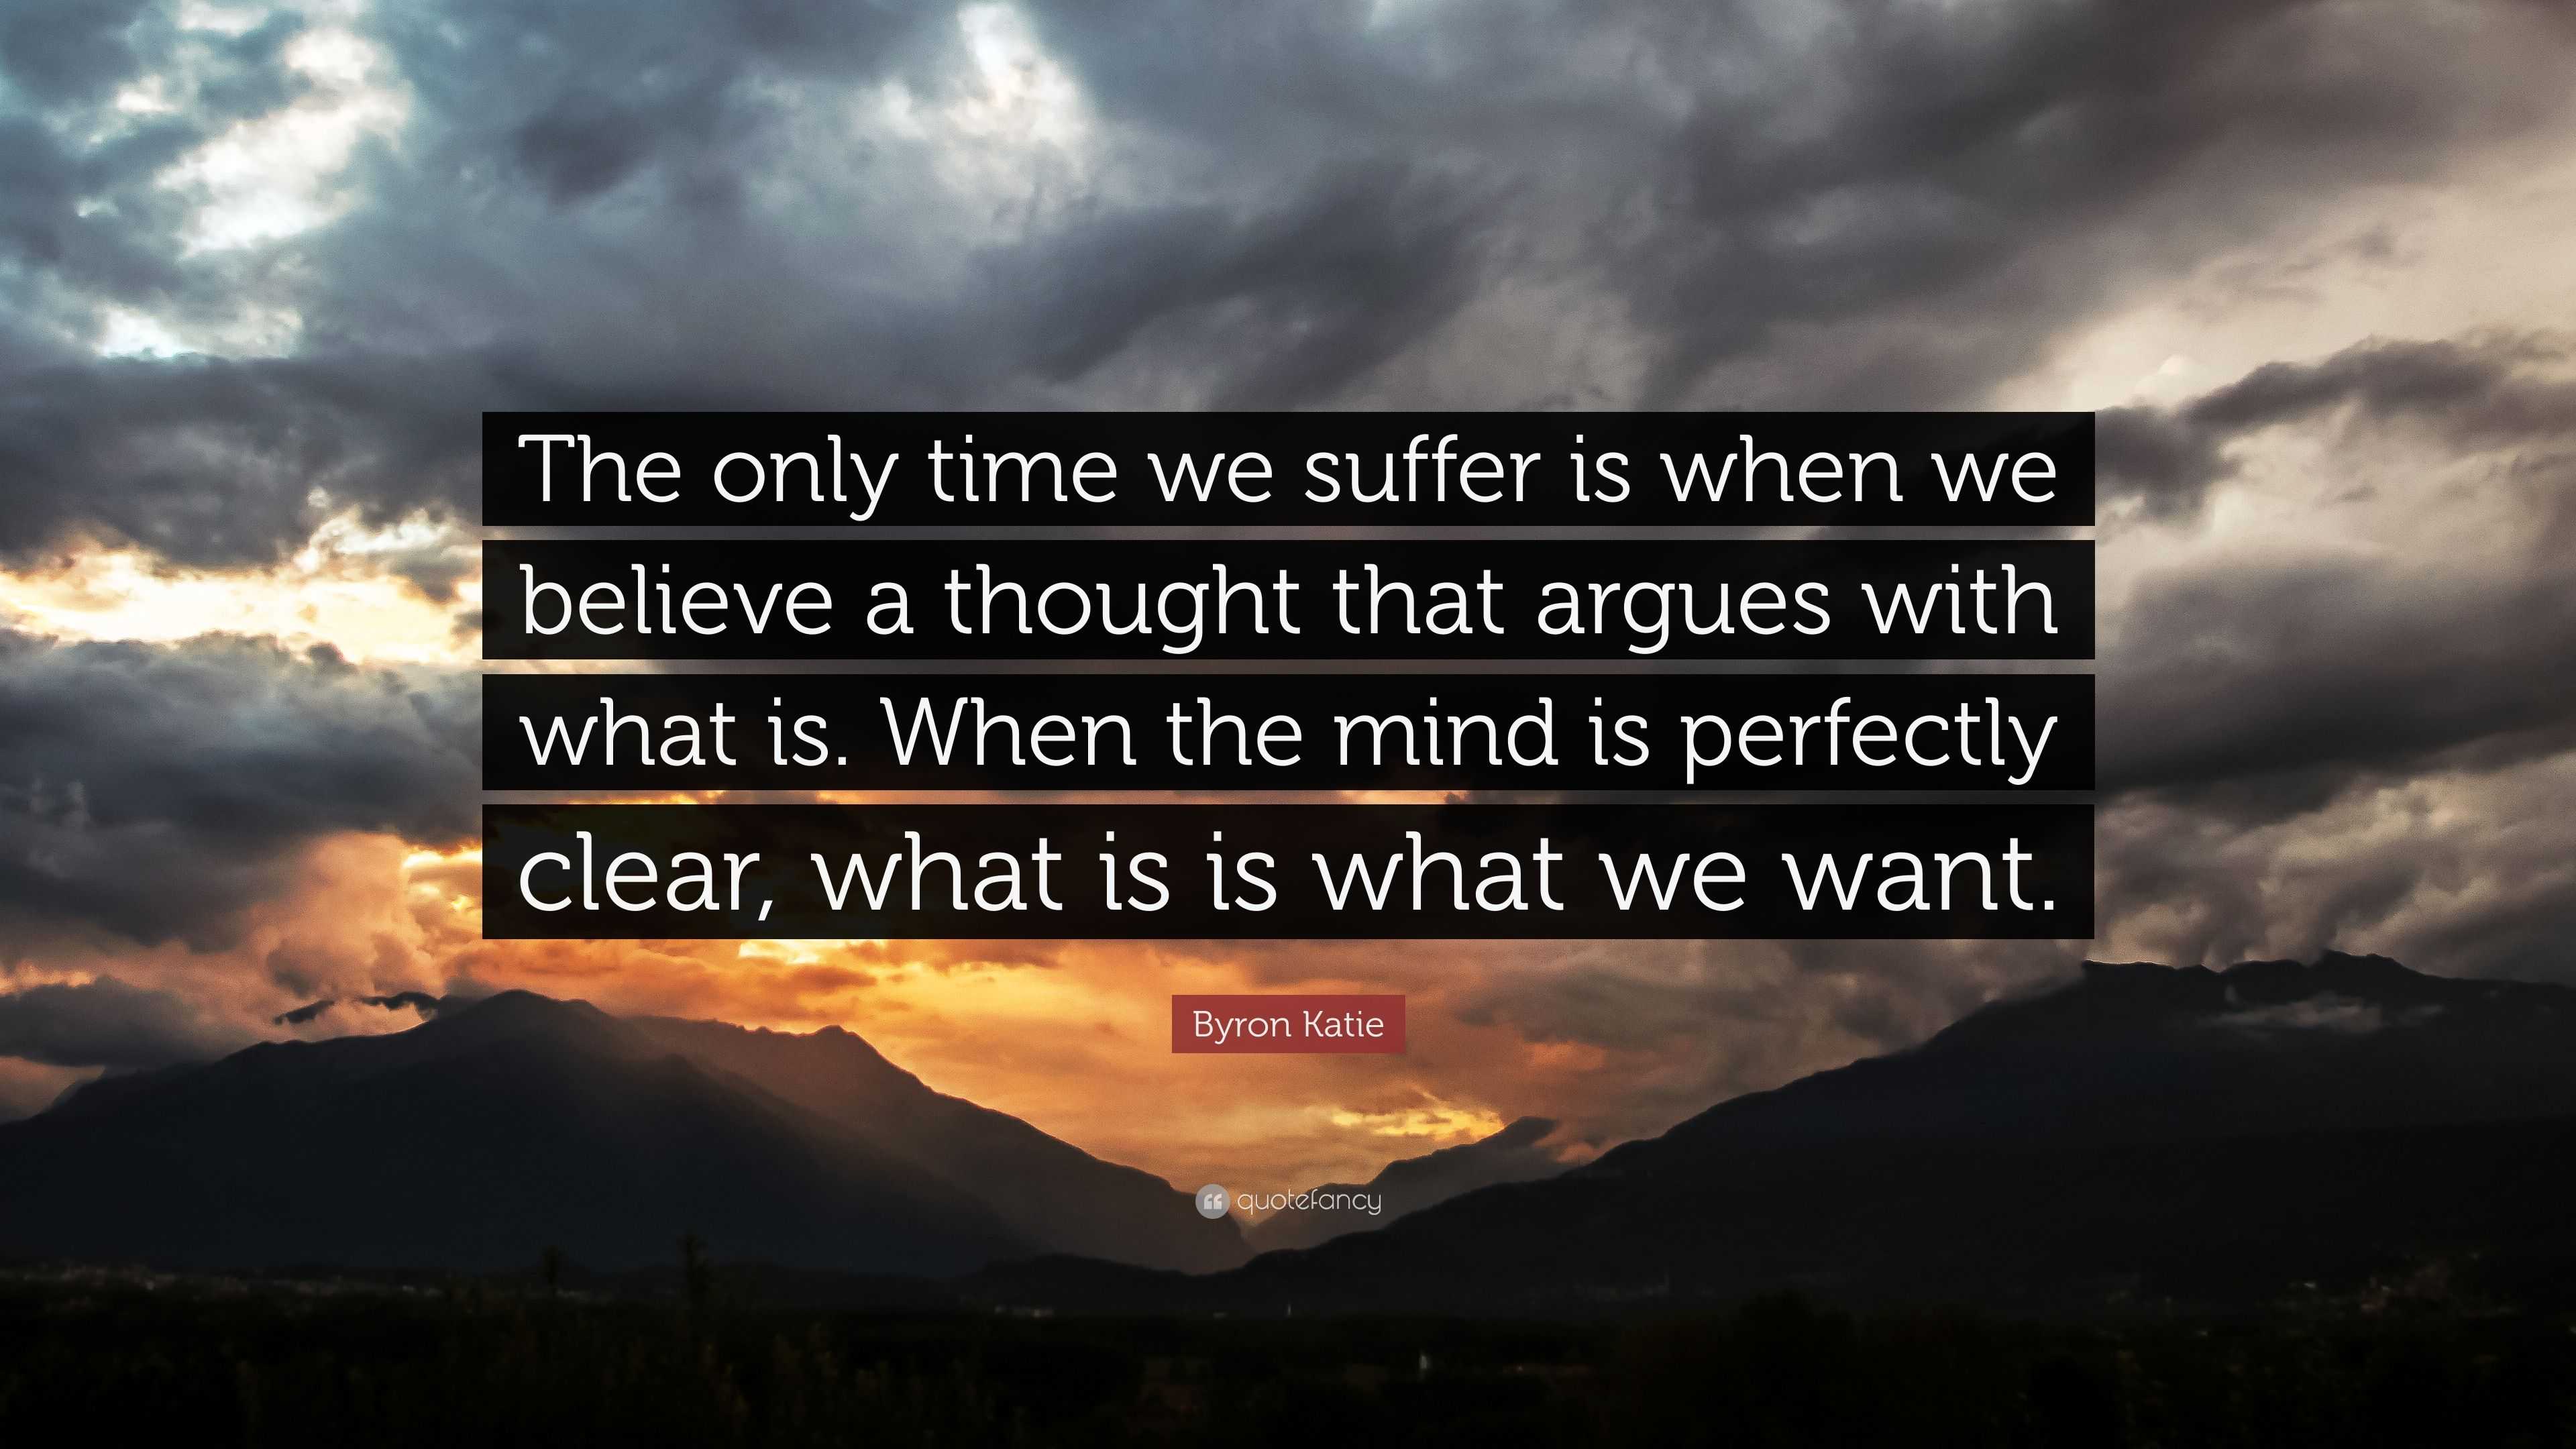 Byron Katie Quote: “The only time we suffer is when we believe a ...